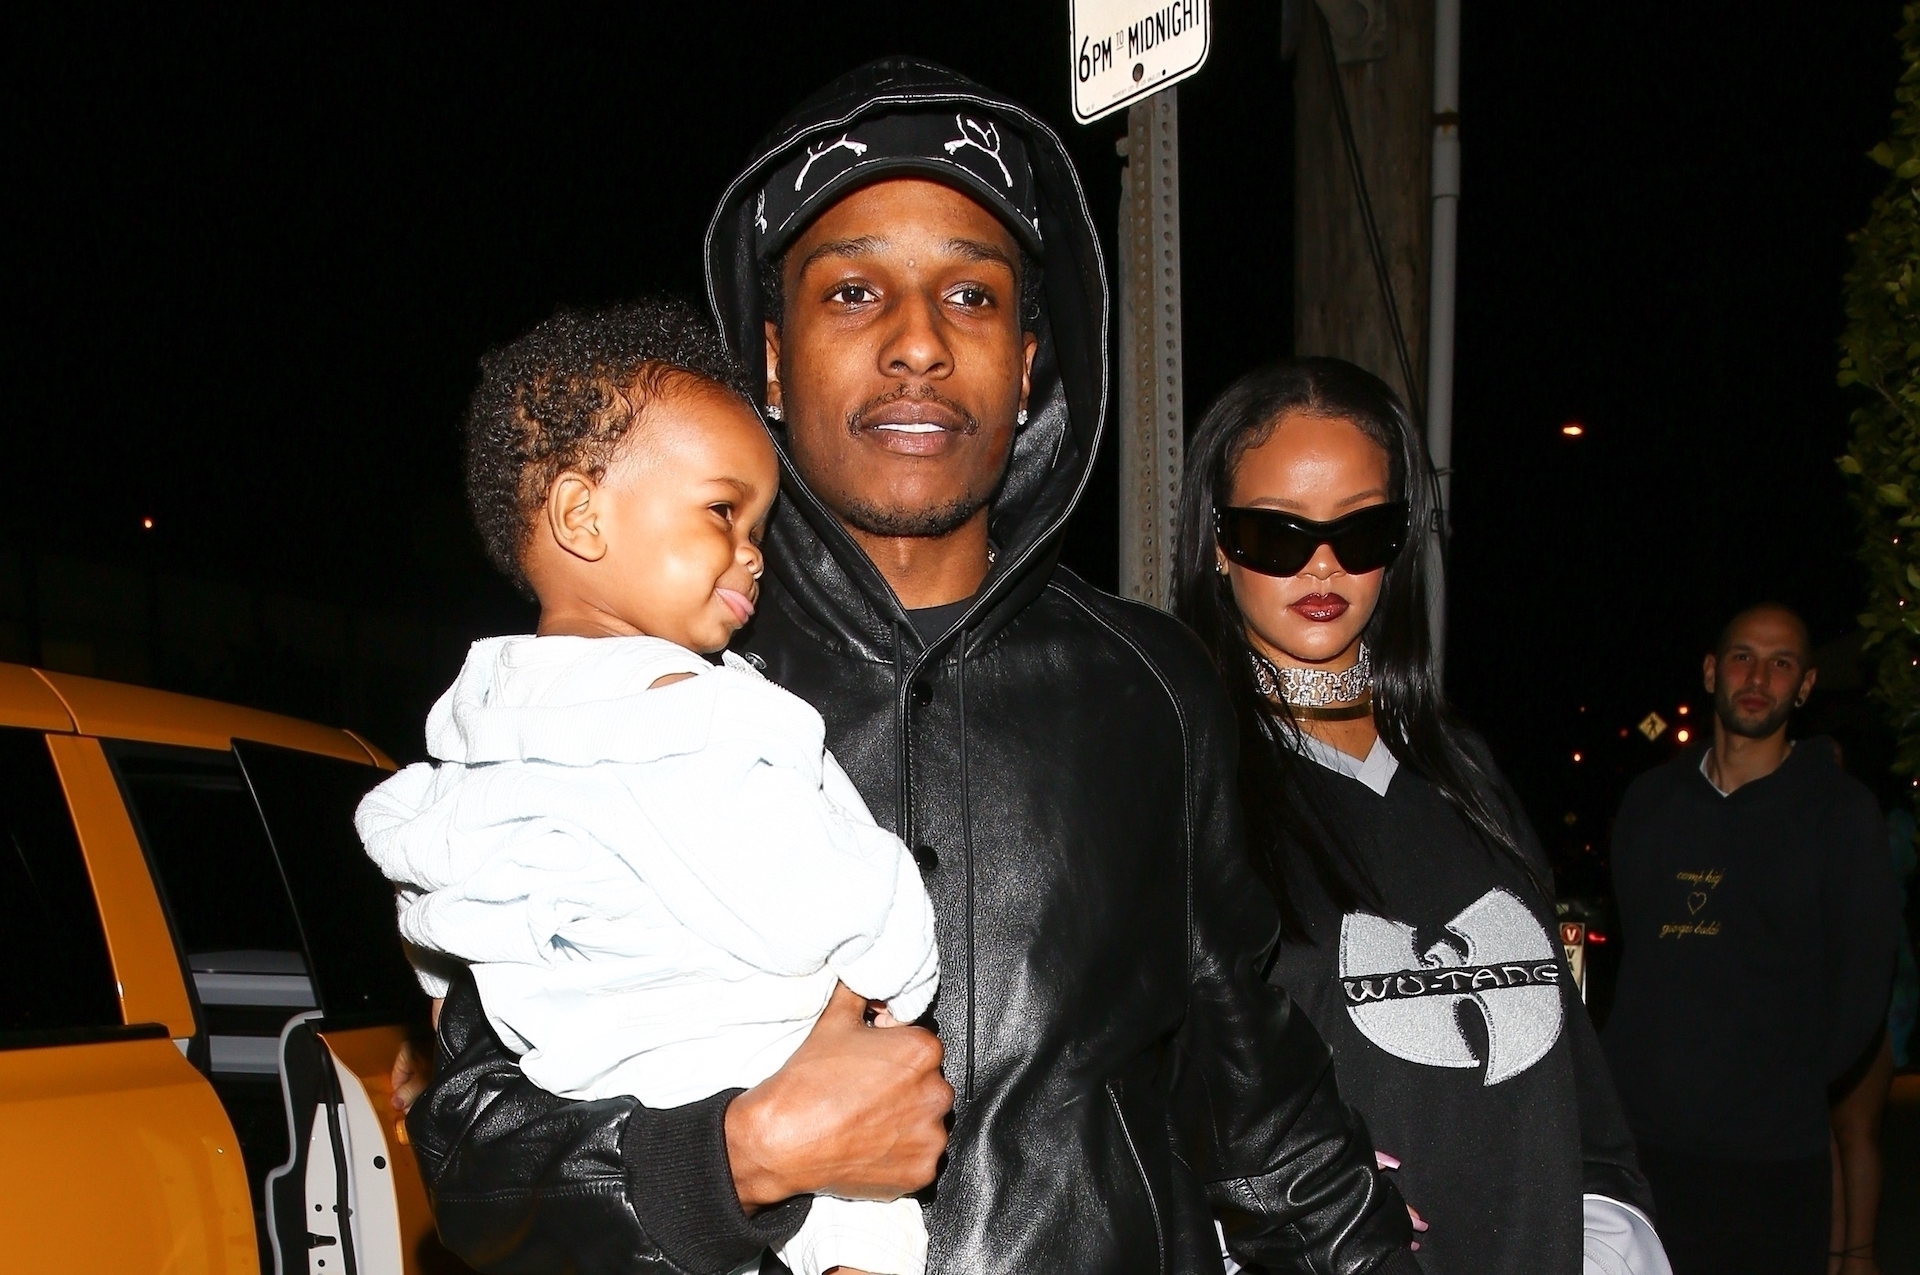 7 Style Tips We Have Learned By Following A$AP Rocky On Instagram